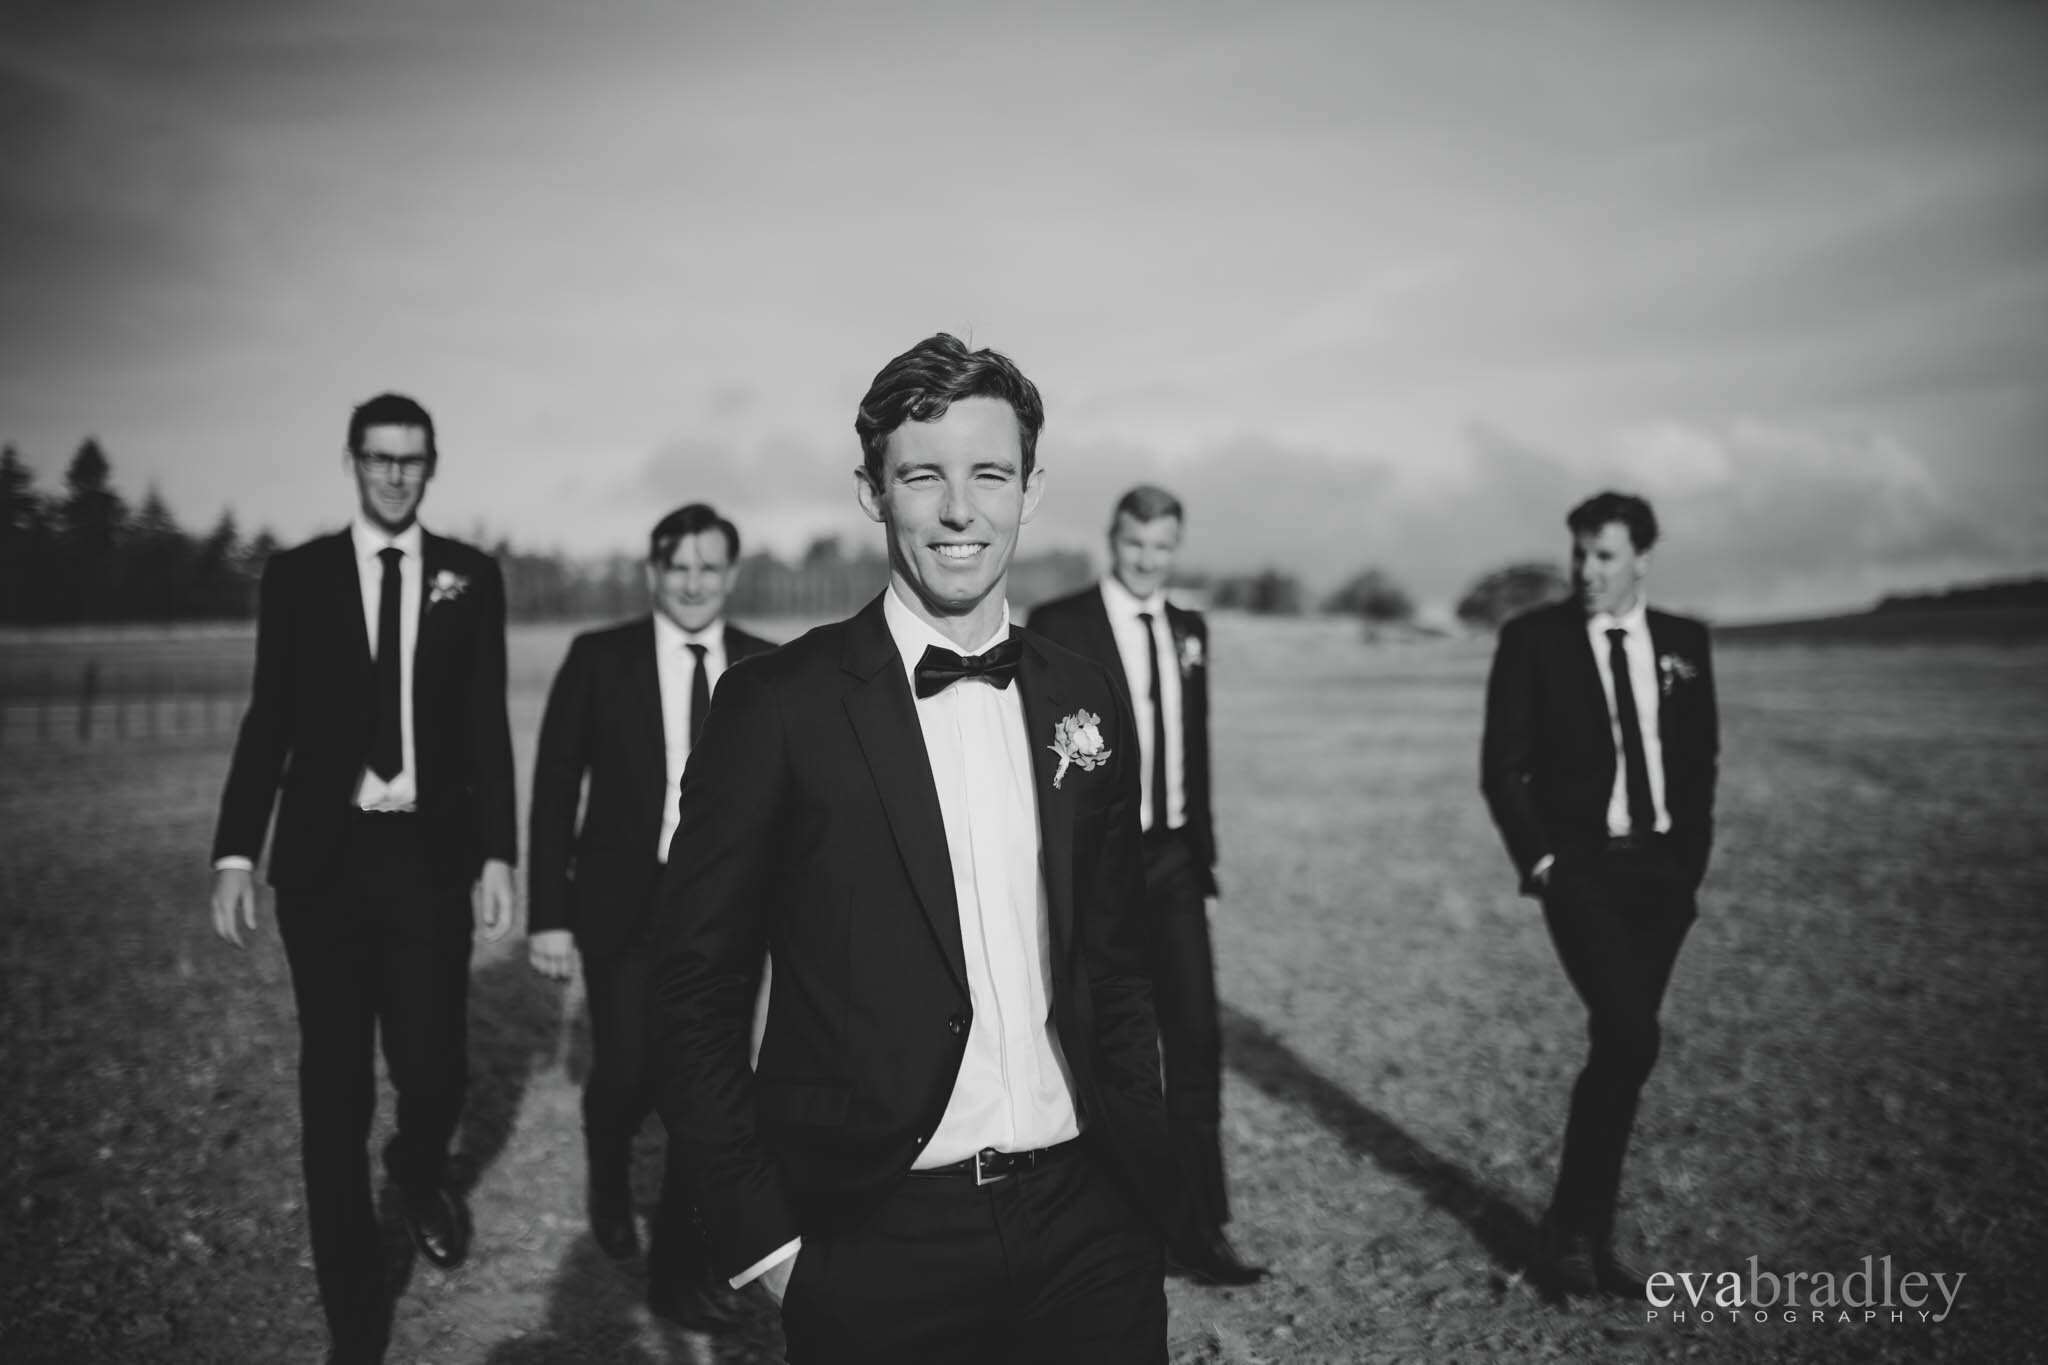 barkers-suits-at-weddings-nz